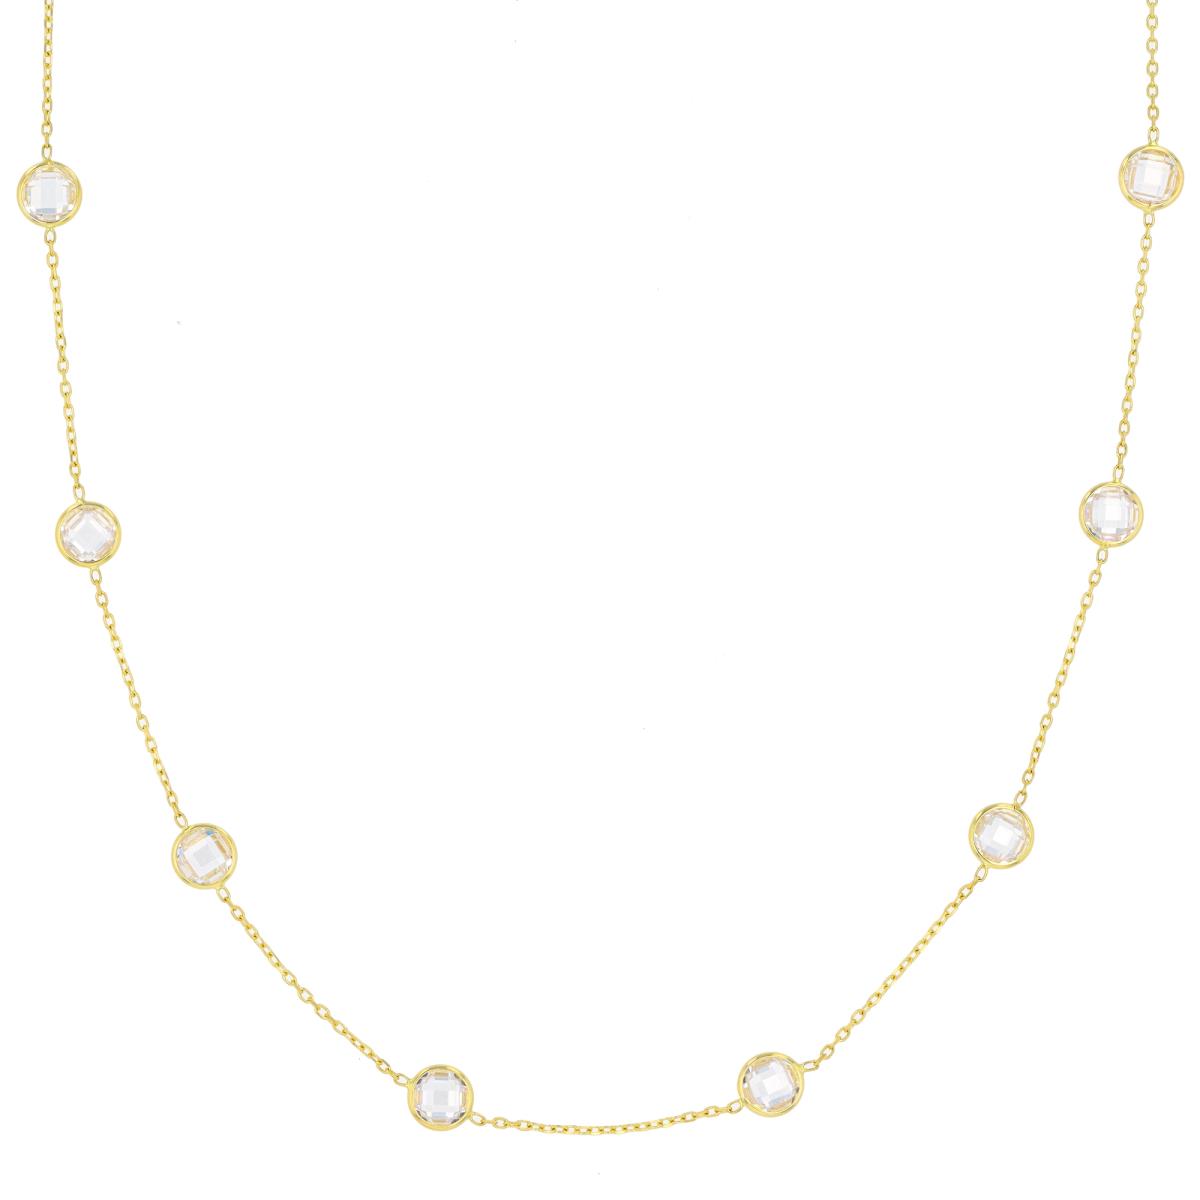 14K Yellow Gold 4mm Cabochon RD Bezel Station 16"+2" Necklace